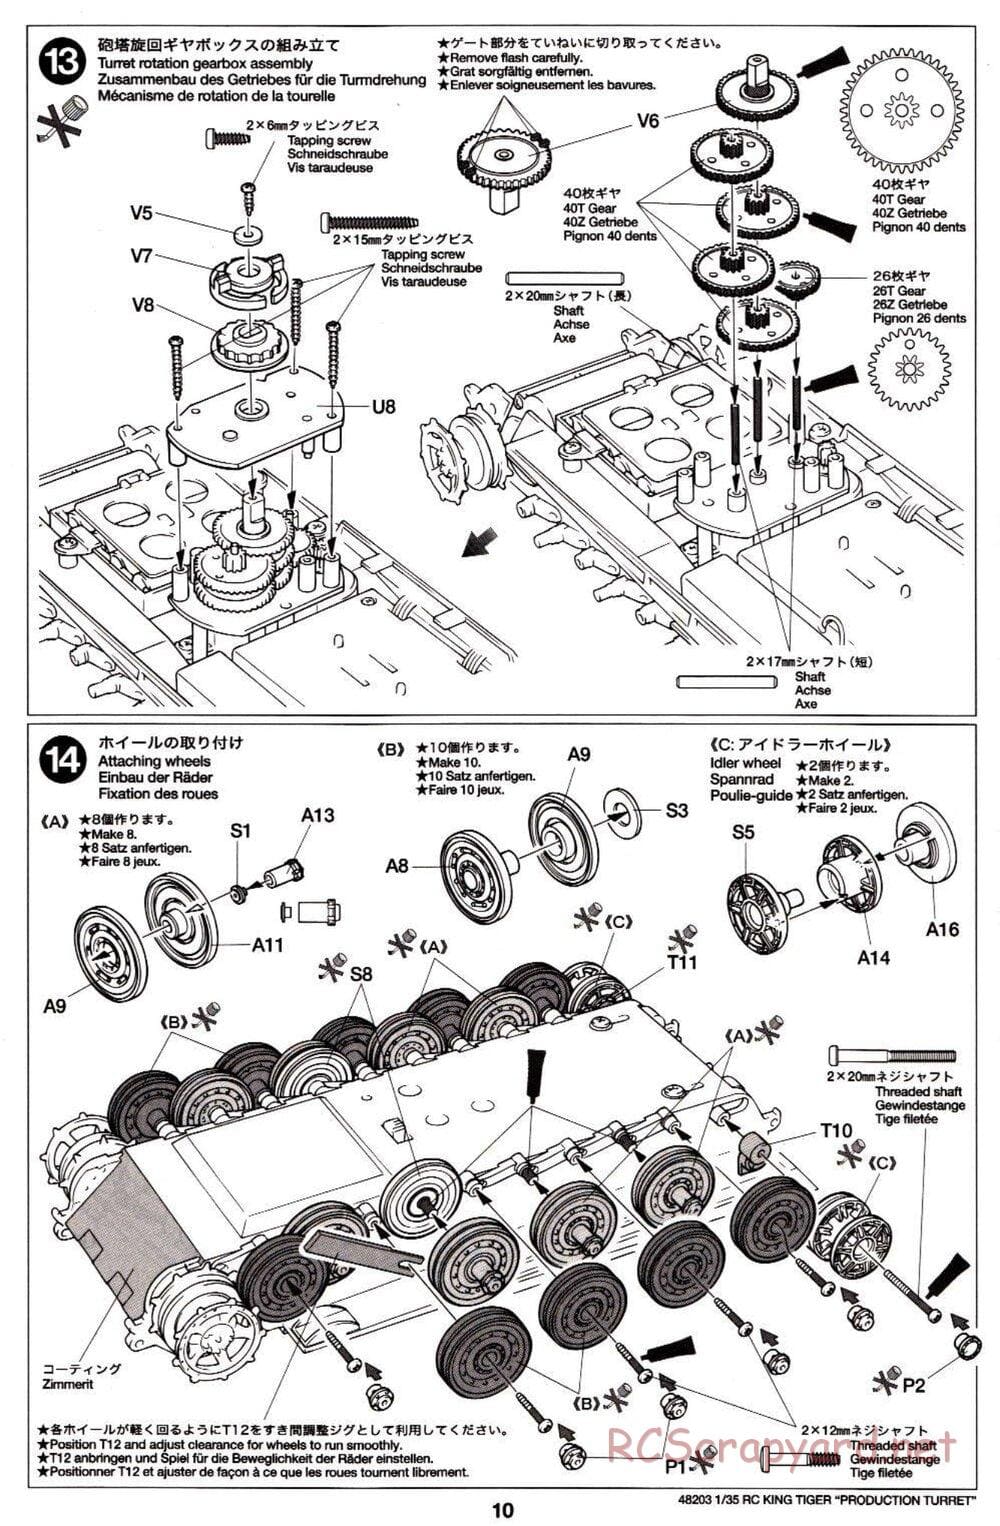 Tamiya - German King Tiger (Production Turret) - 1/35 Scale Chassis - Manual - Page 10